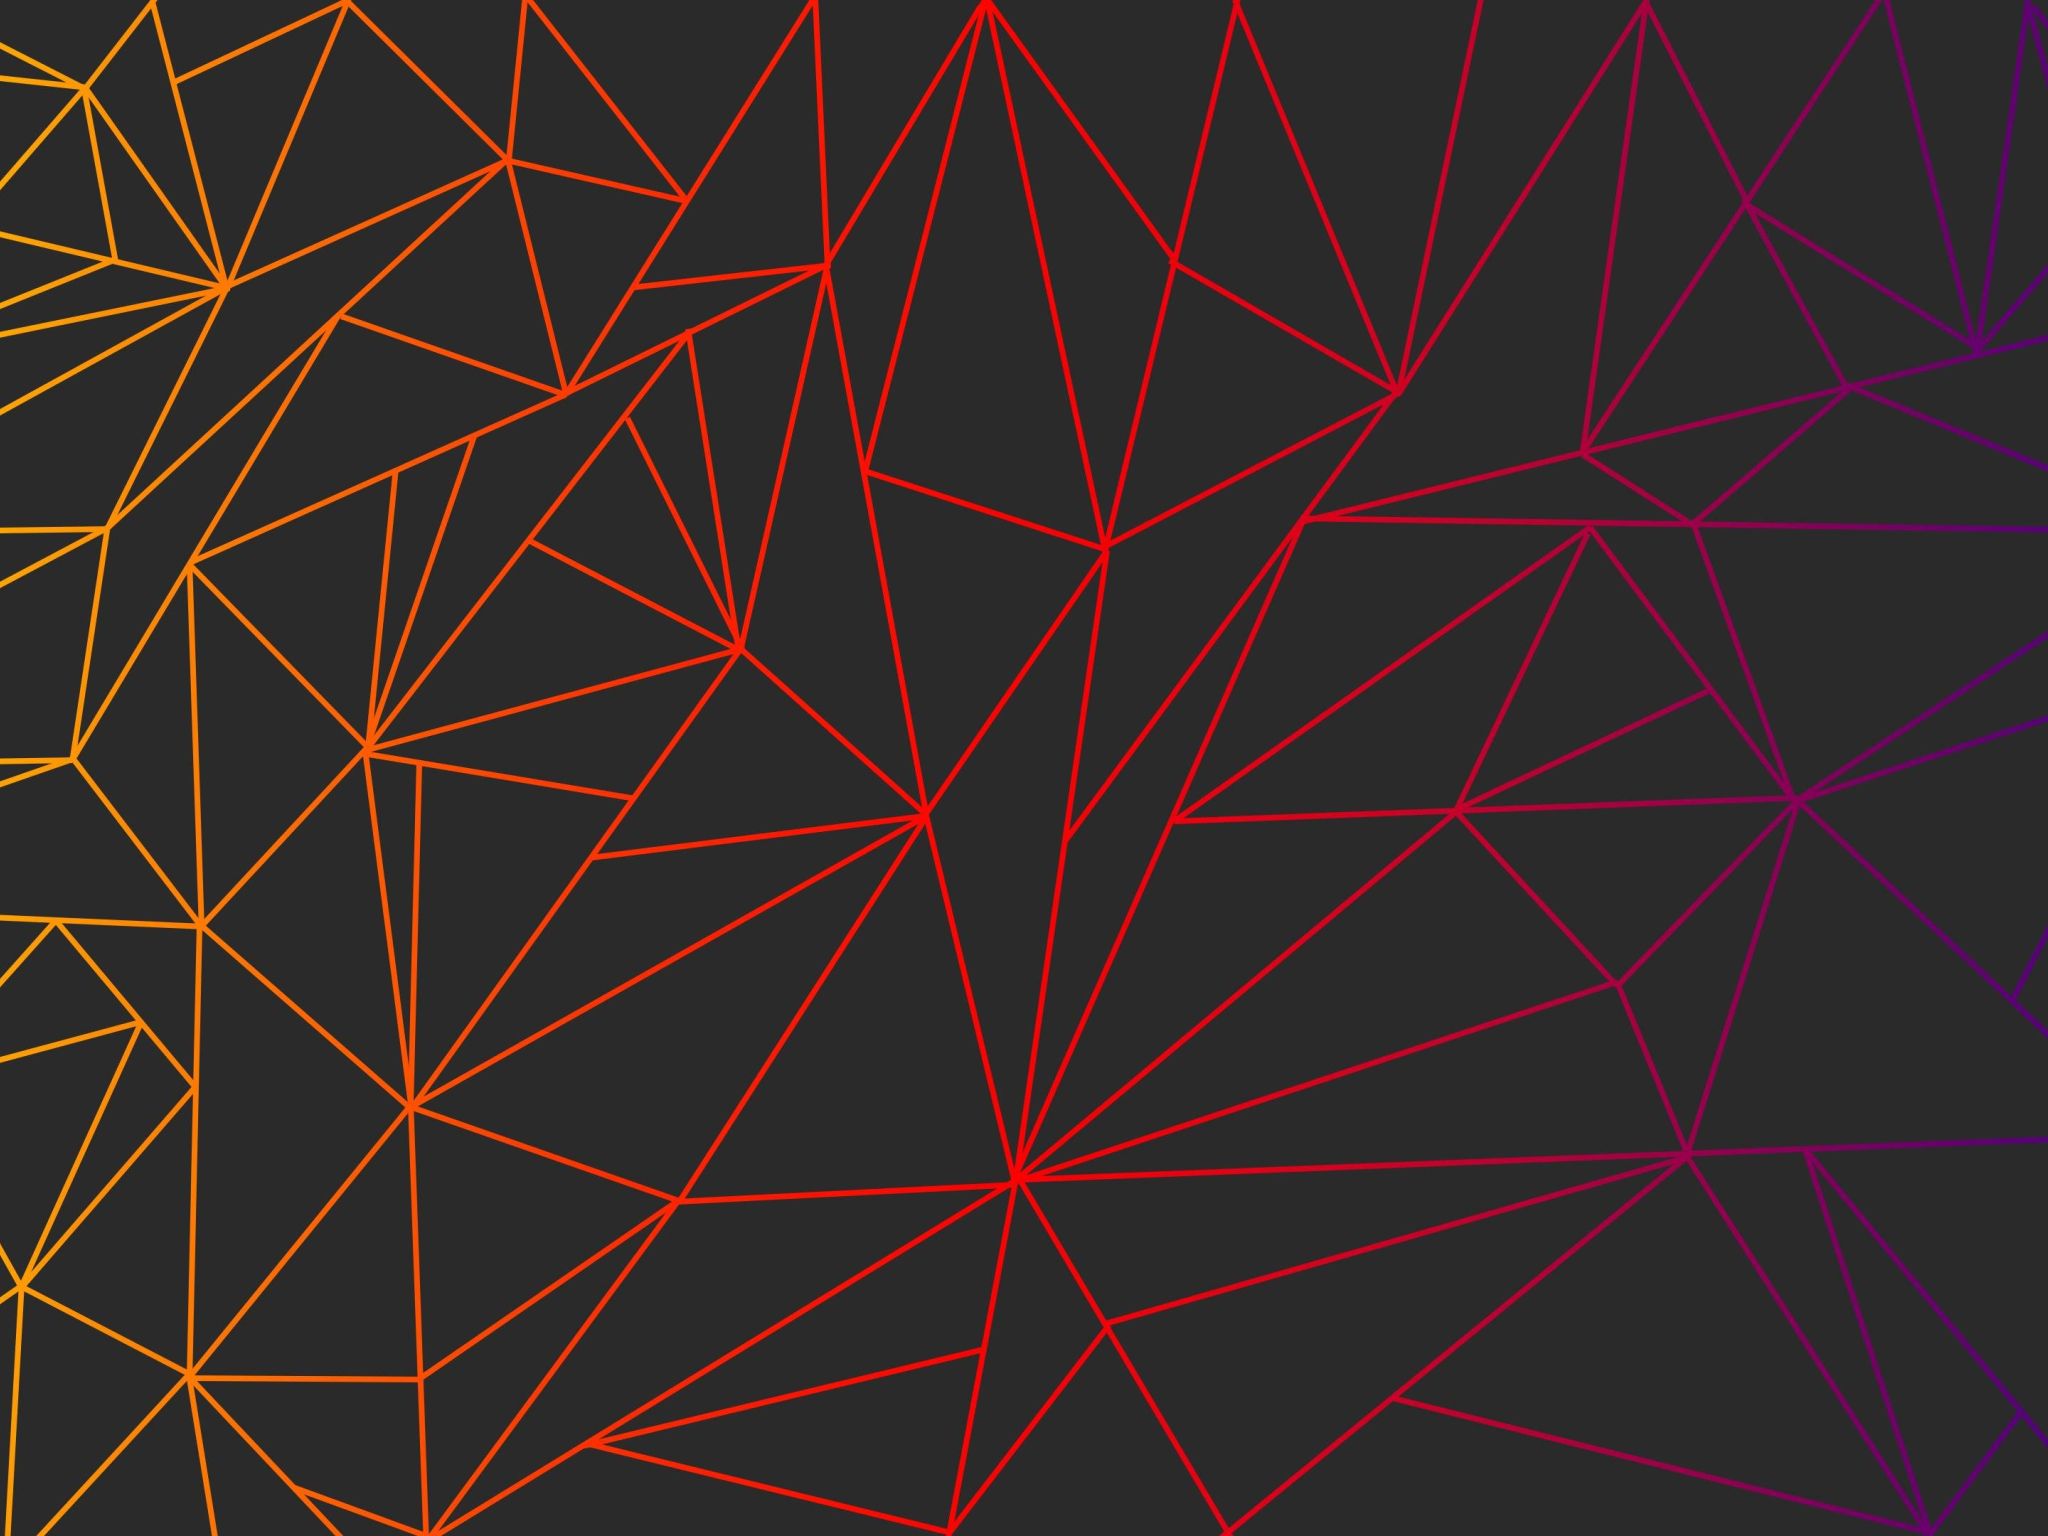 Triangular Wallpaper Inspired by the electric Hive Skin in CS GO wallpaper  in 2048x1536 resolution